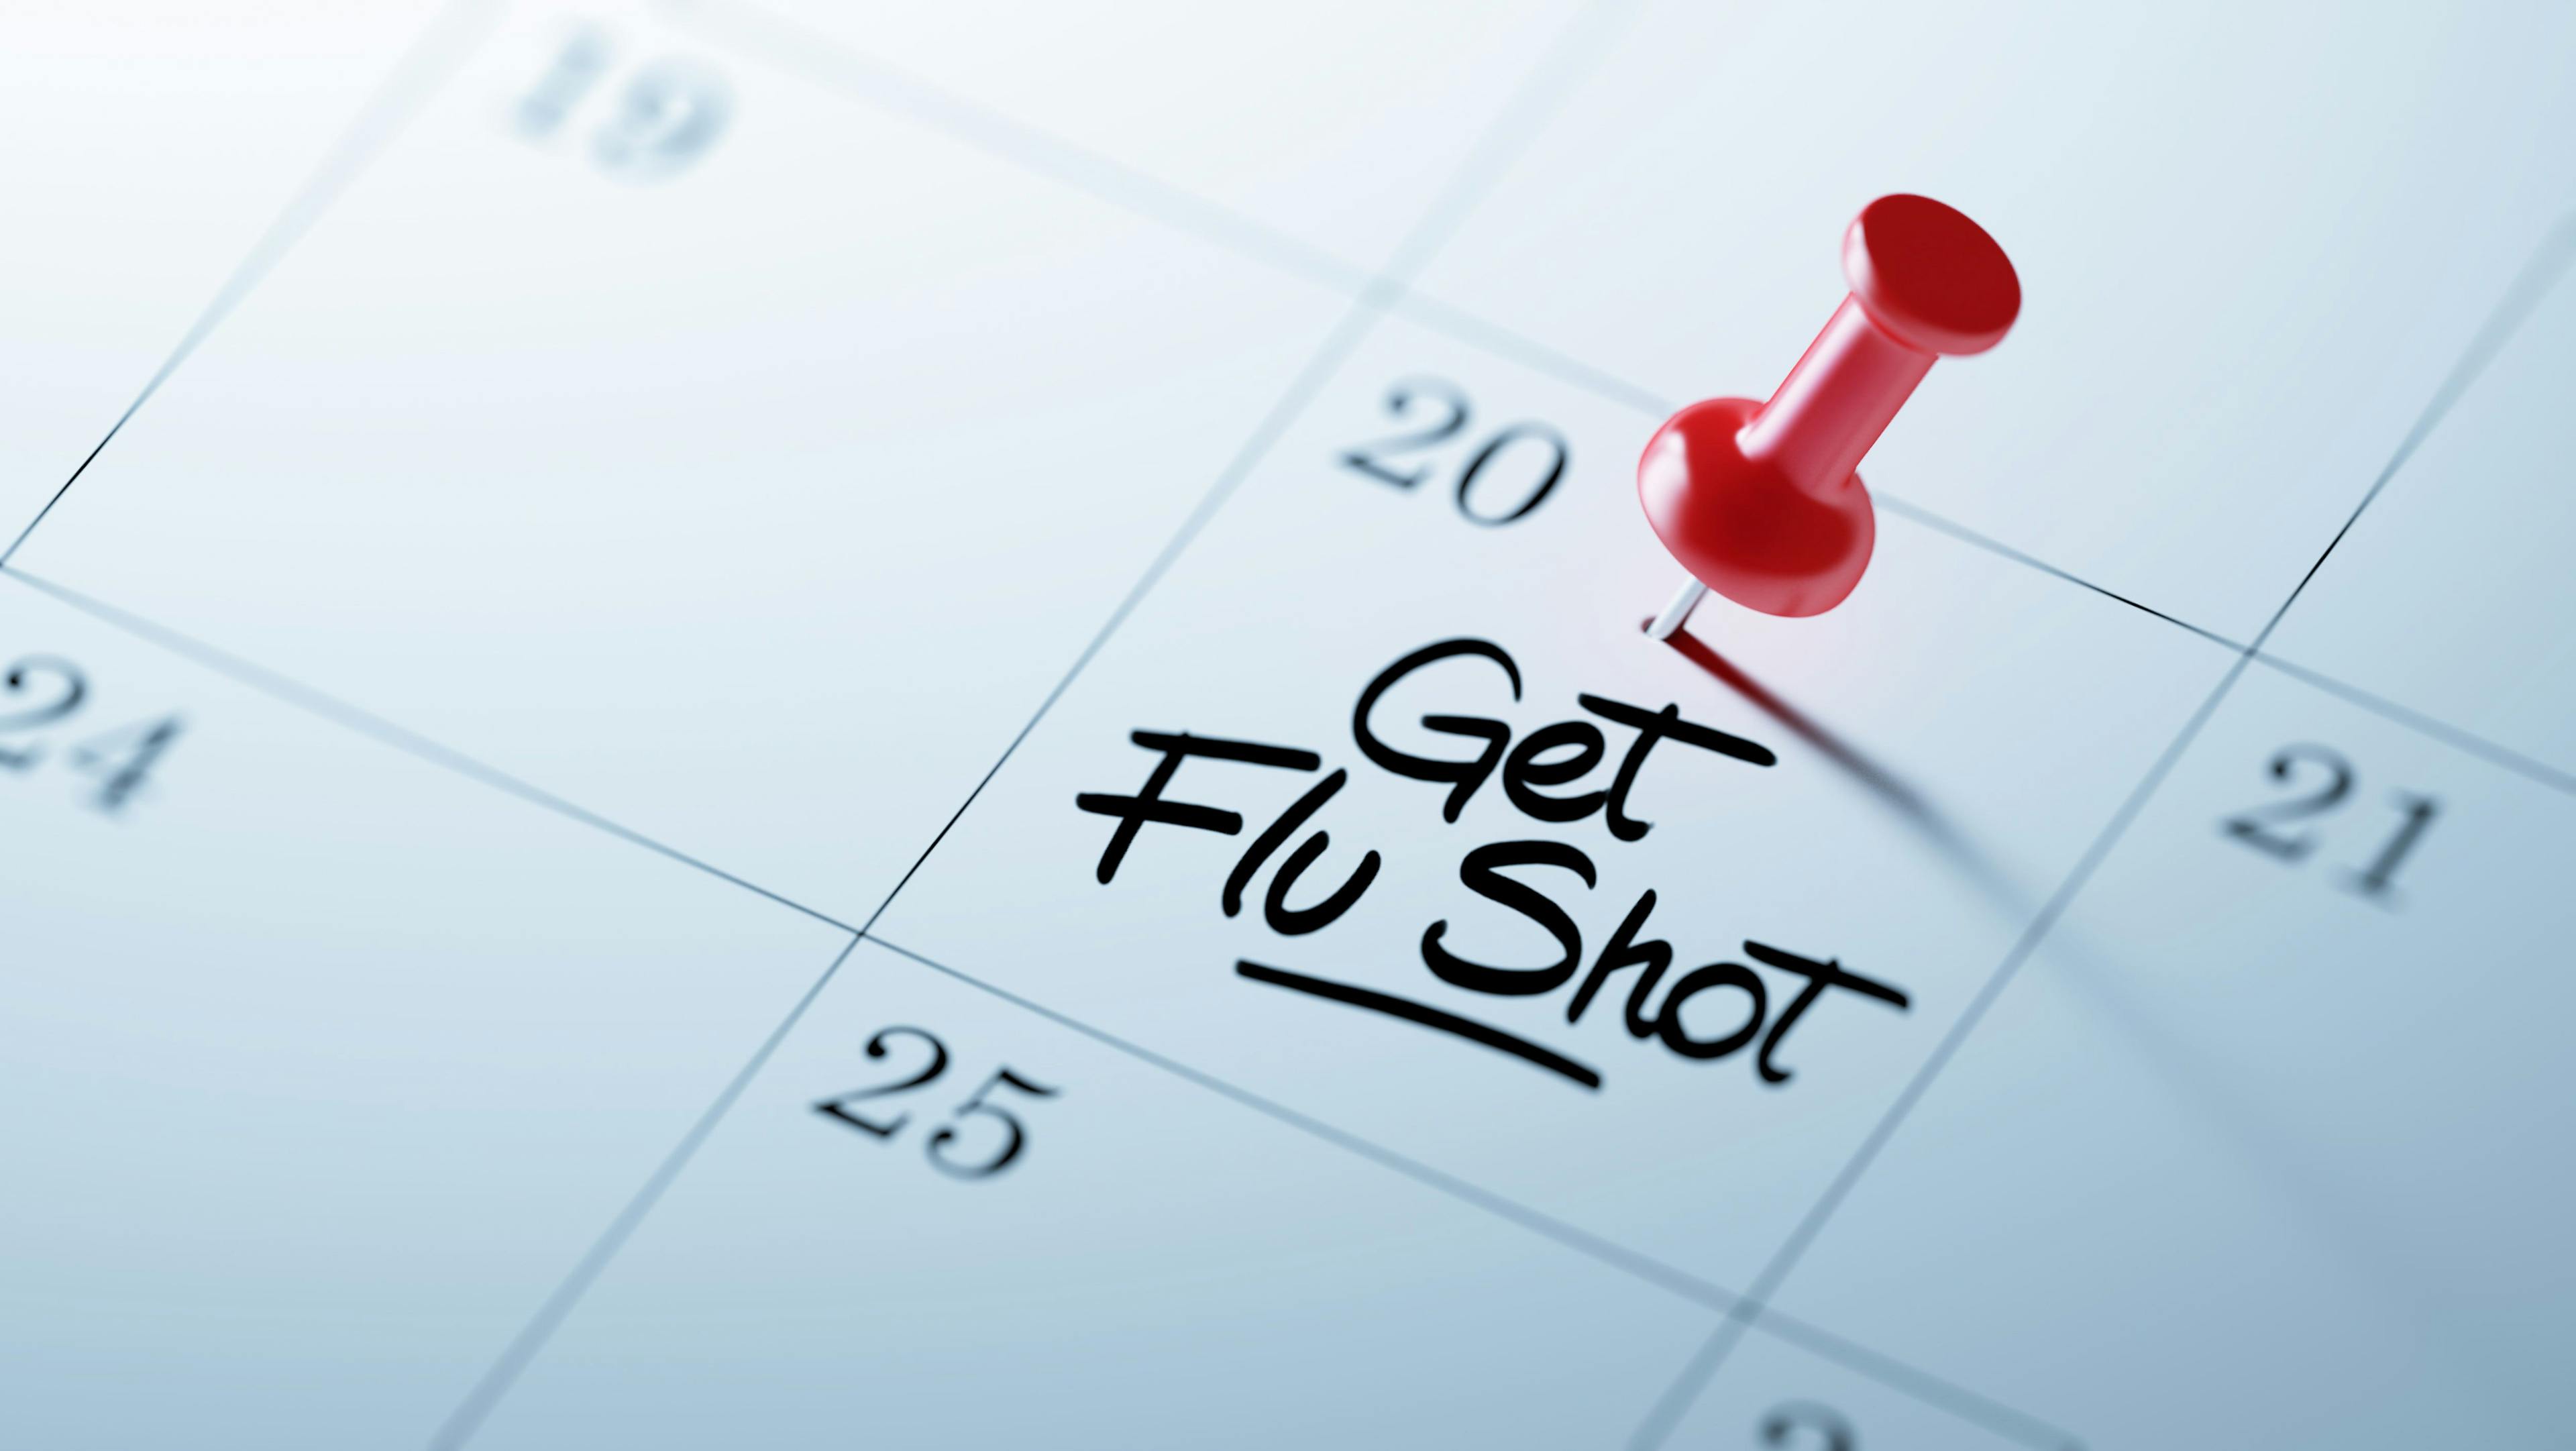 Health Officials Urge Flu Vaccination, But Few Adults Plan to Get the Shot